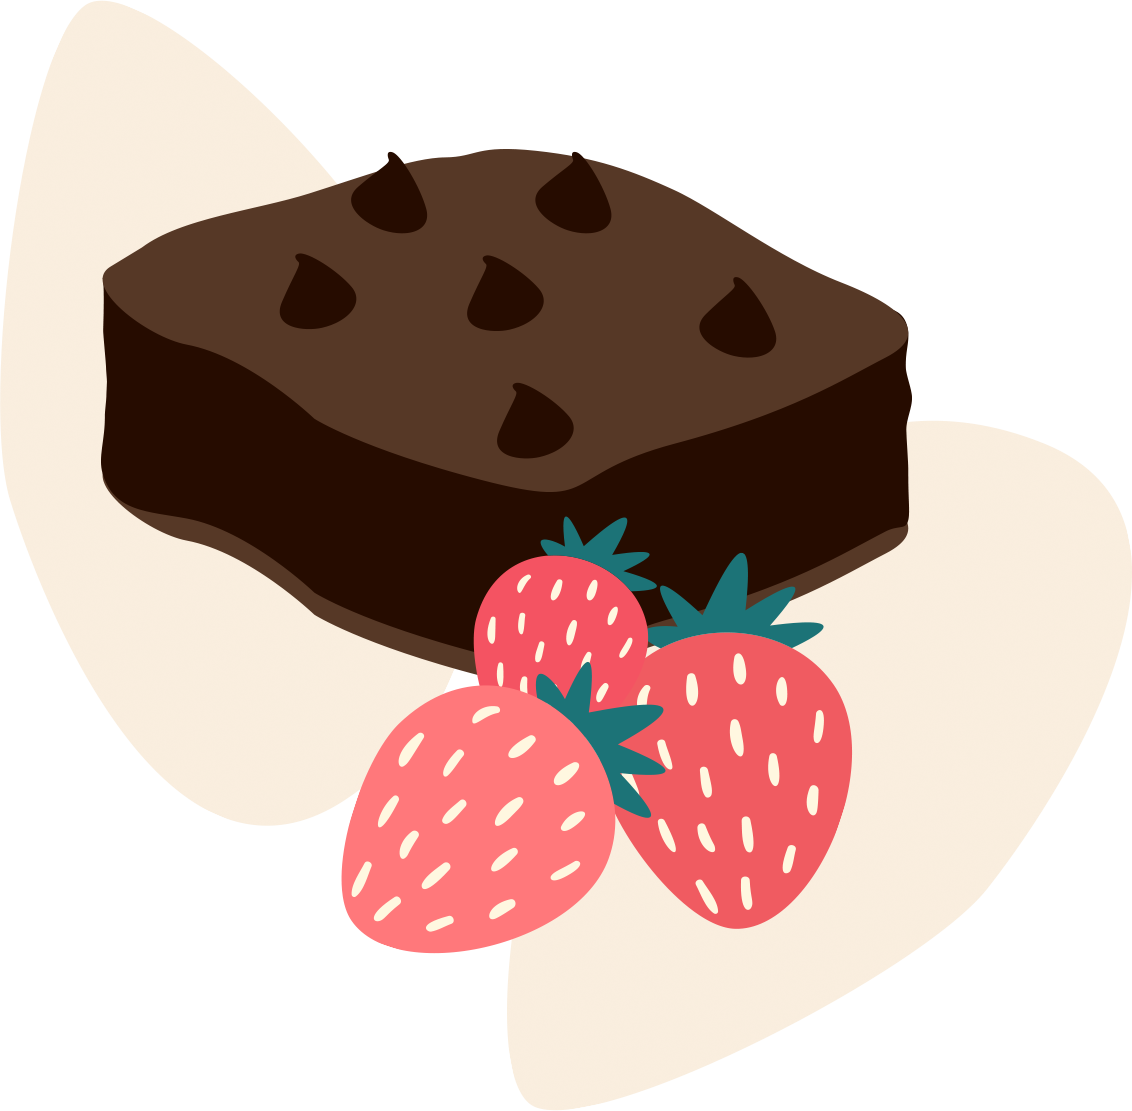 brownies and strawberries illustration